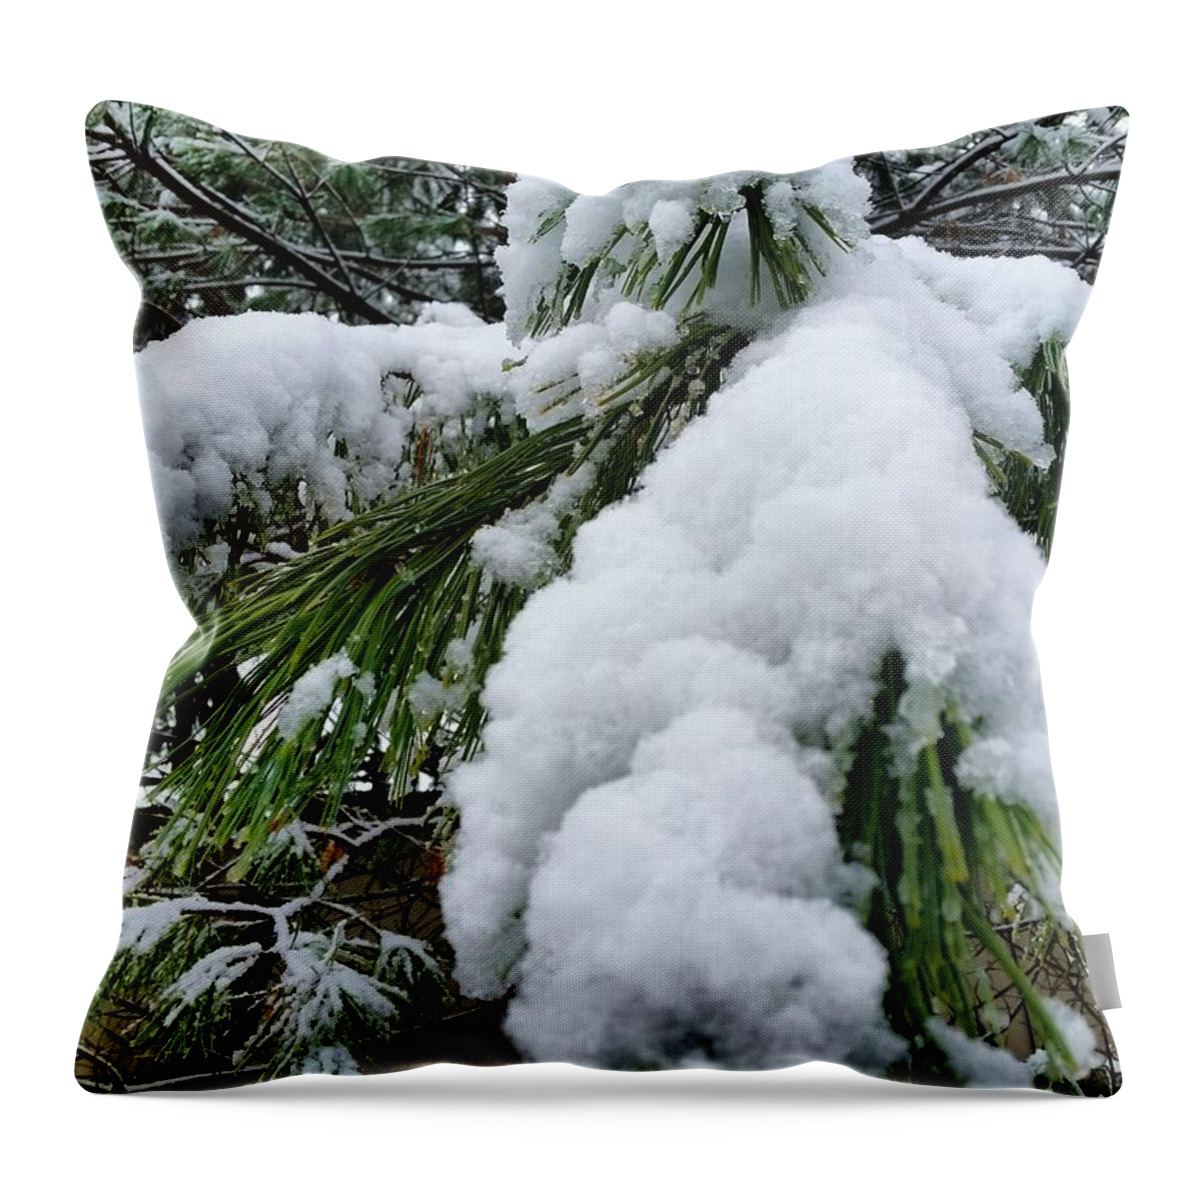 Snow Throw Pillow featuring the photograph Snow on Evergreen Branch by Vic Ritchey